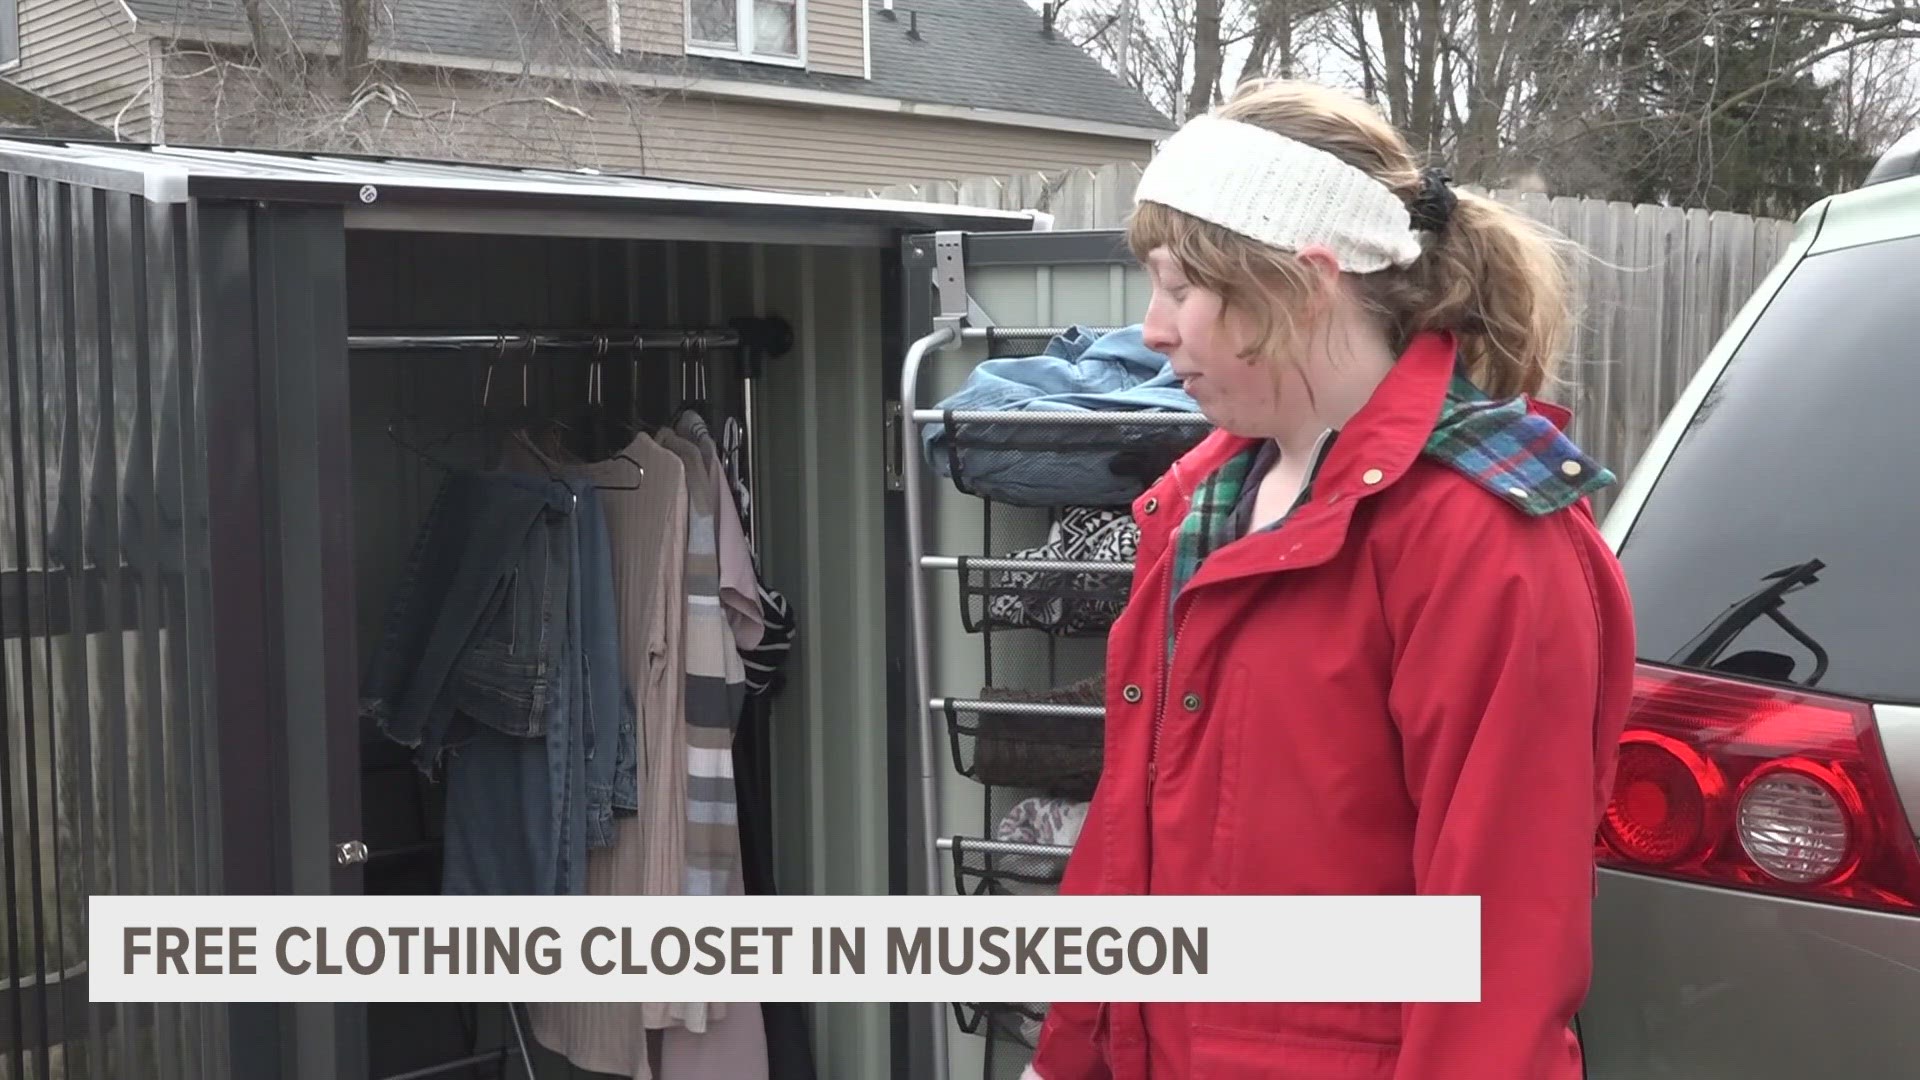 Muskegon free food pantry adds clothes to its donated items